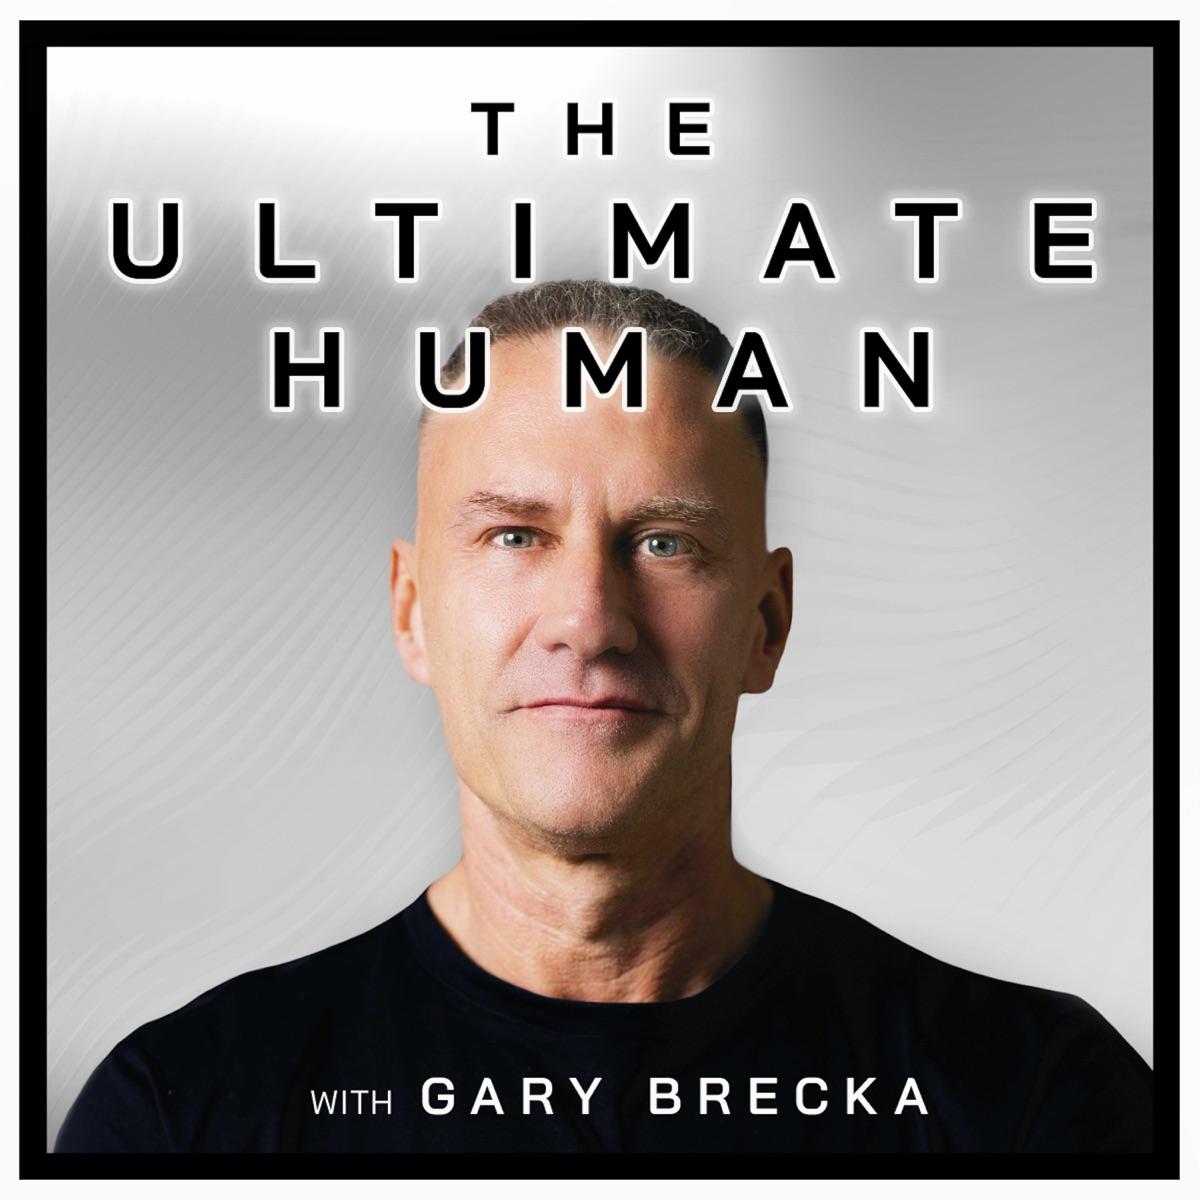 A black and white image of a mans face with text reading: The Ultimate Human with Gary Brecka.